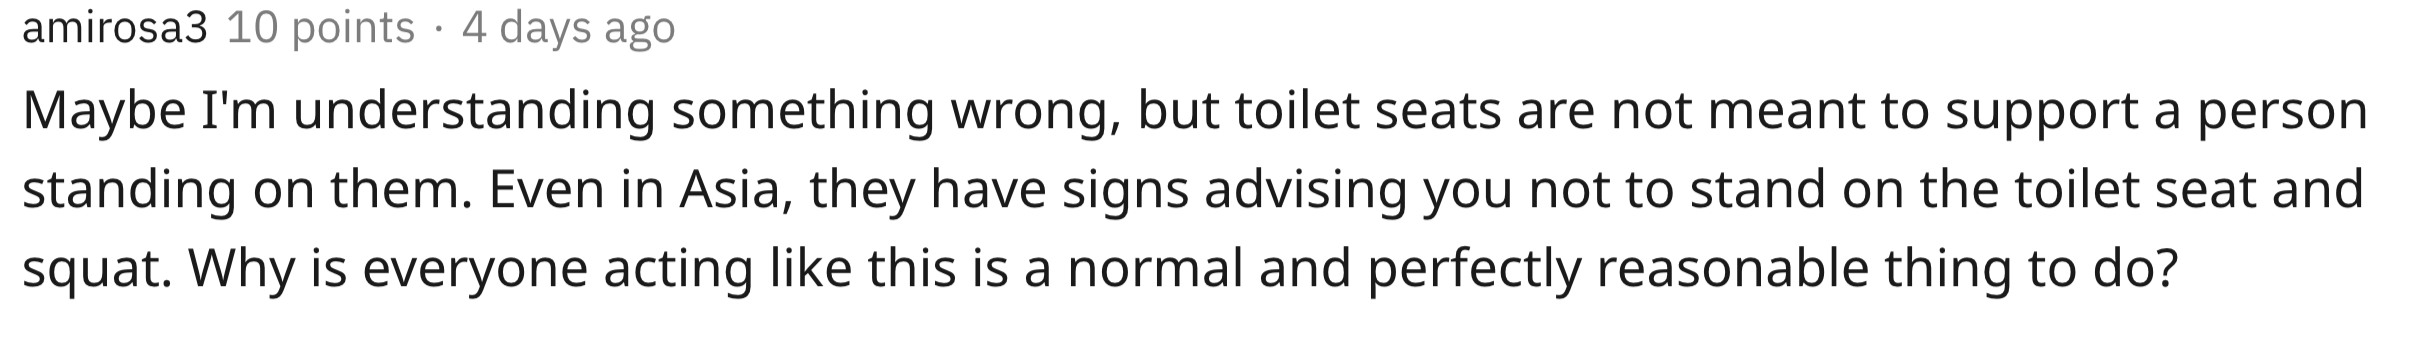 Maybe I'm understanding something wrong, but toilet seats are not meant to support a person standing on them. Even in Asia, they have signs advising you not to stand on the toilet seat and squat. Why is everyone acting this is…